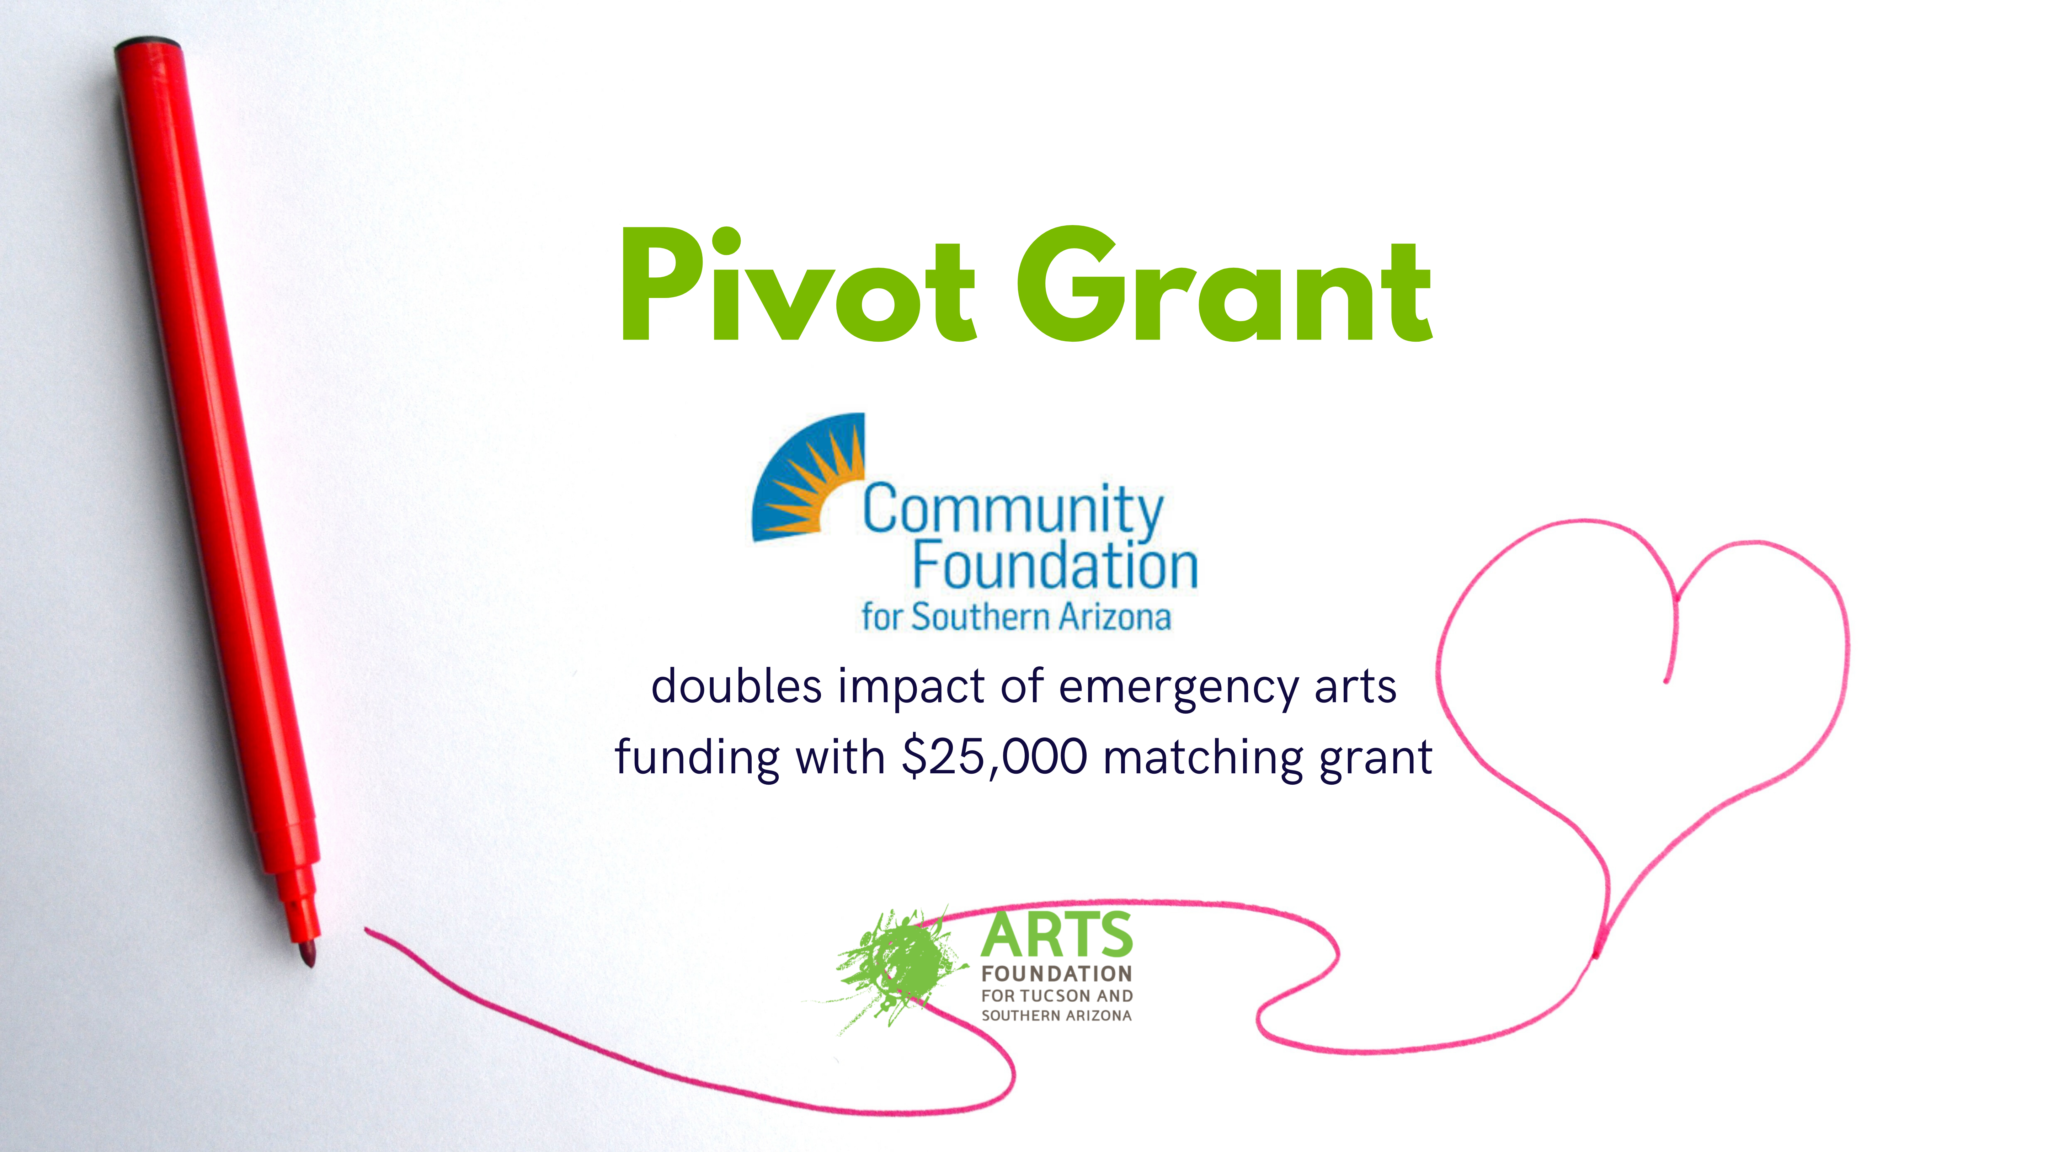 Community Foundation for Southern Arizona doubles impact of Pivot Grant with $25,000 matching grant